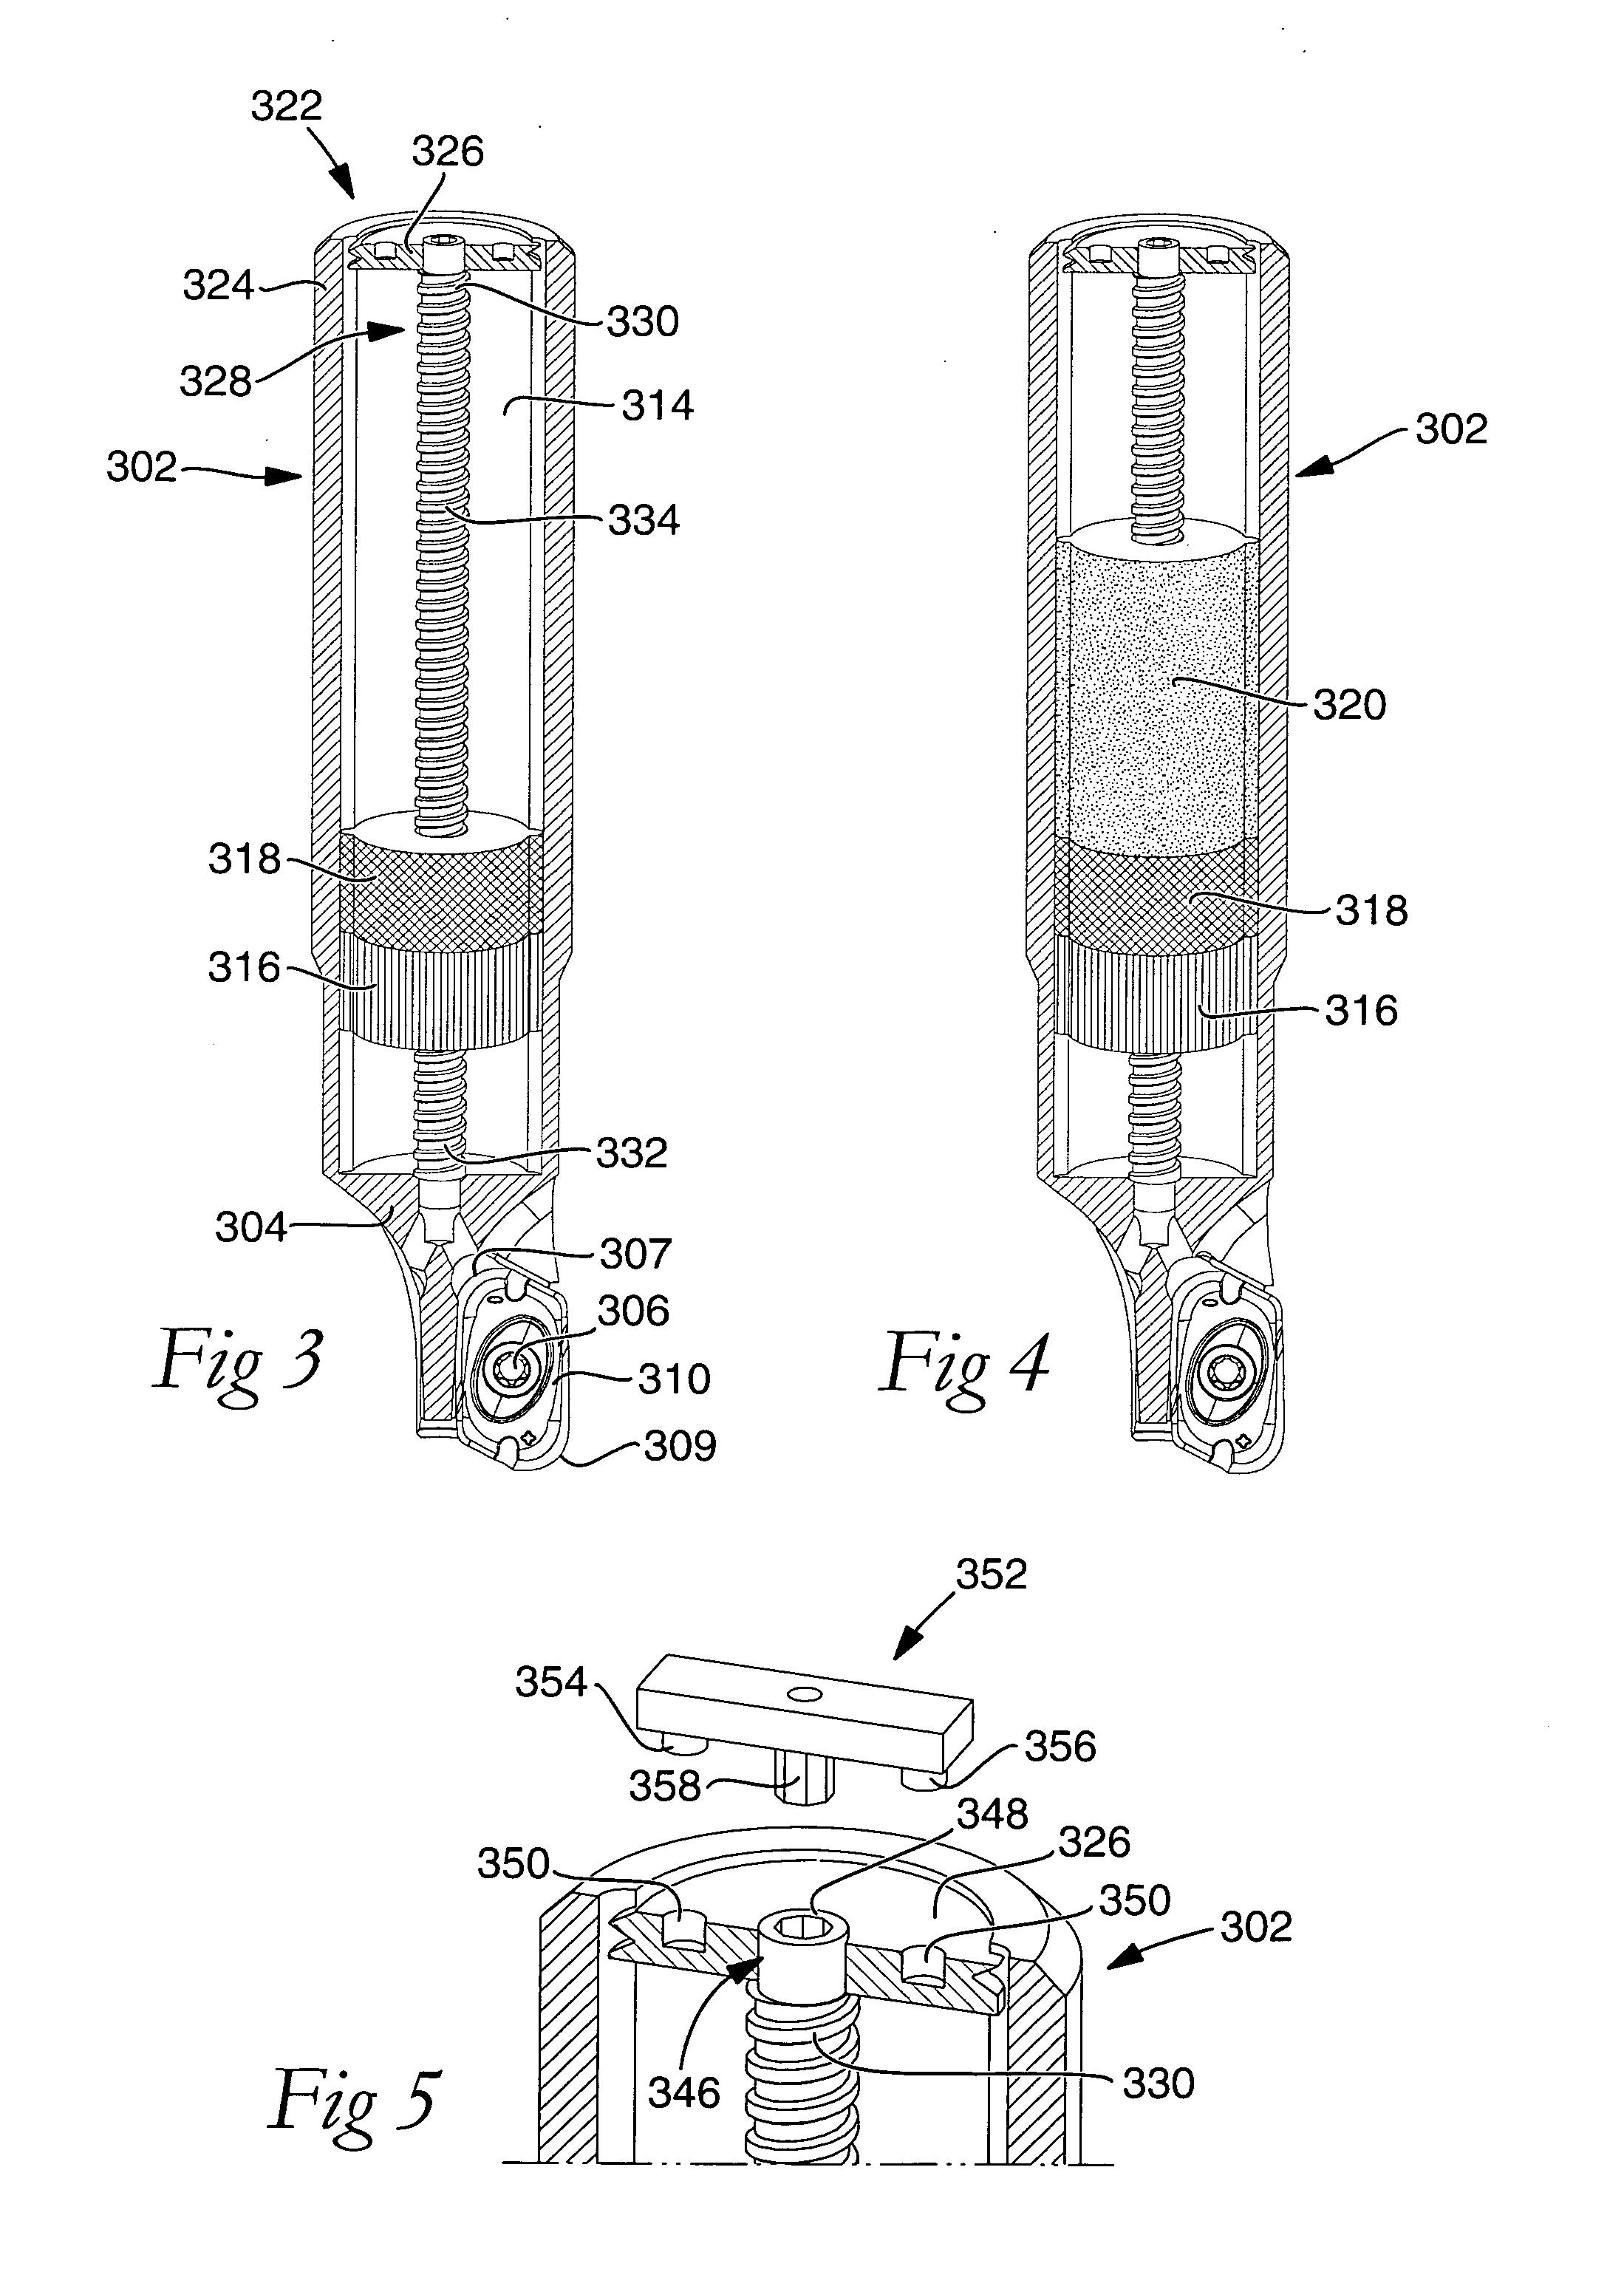 Device and method for milling of materials